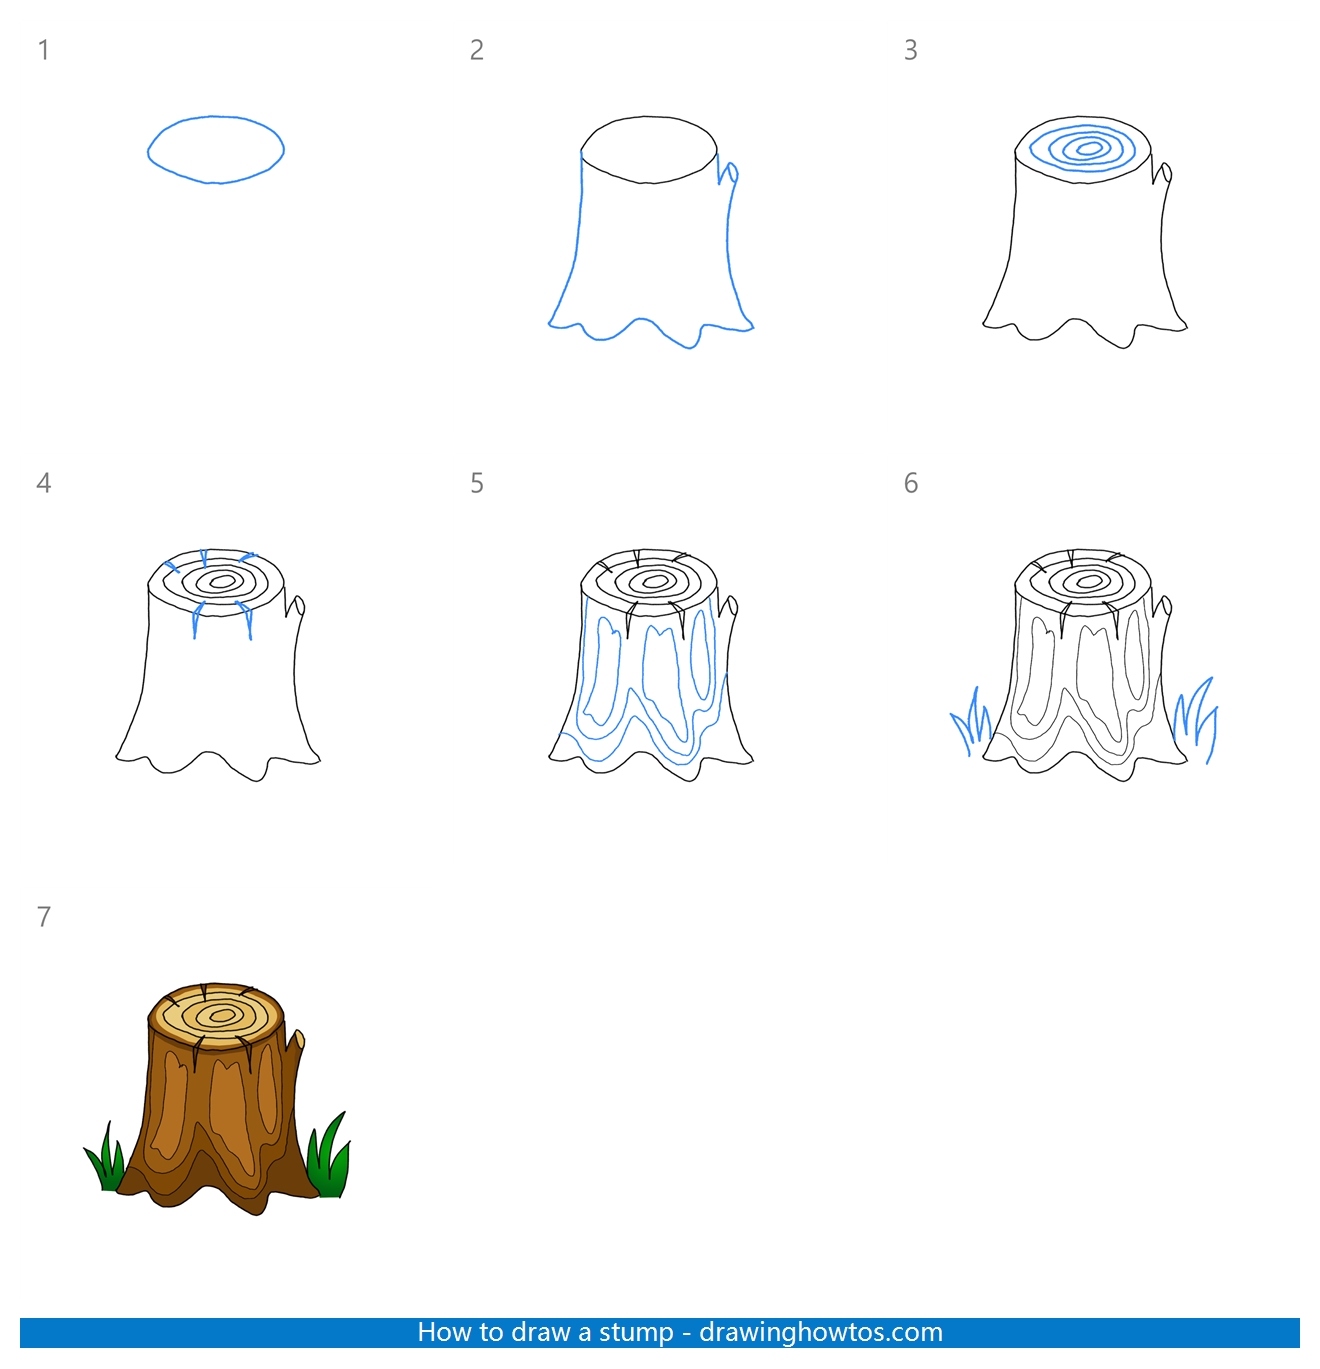 How to Draw a Stump Step by Step